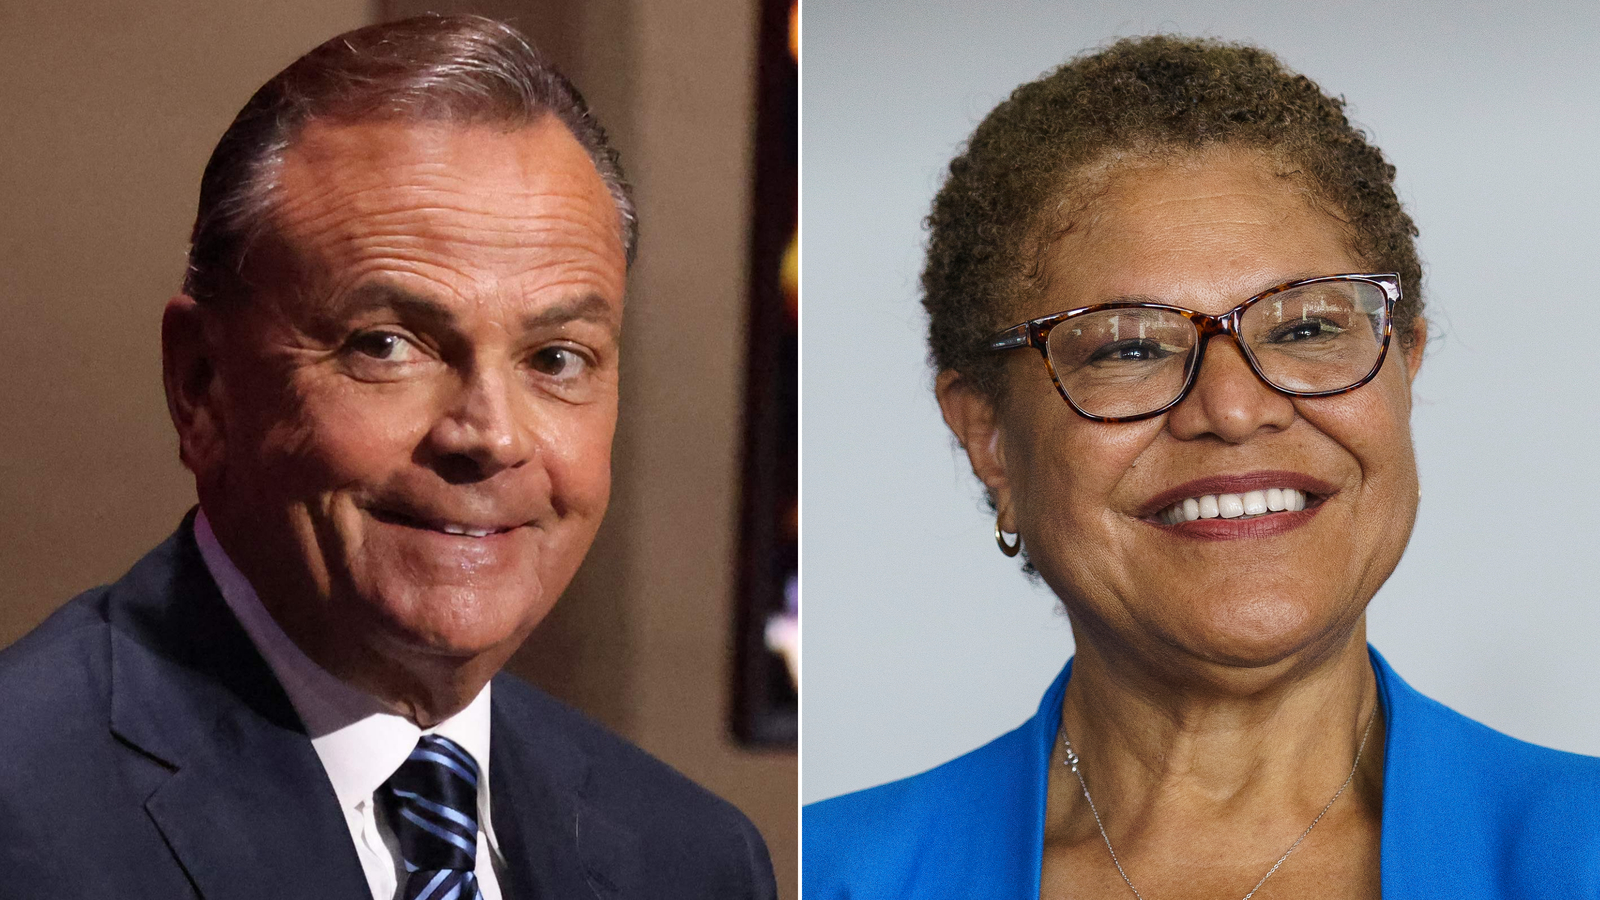 Rick Caruso and Rep. Karen Bass are running for mayor in Los Angeles.